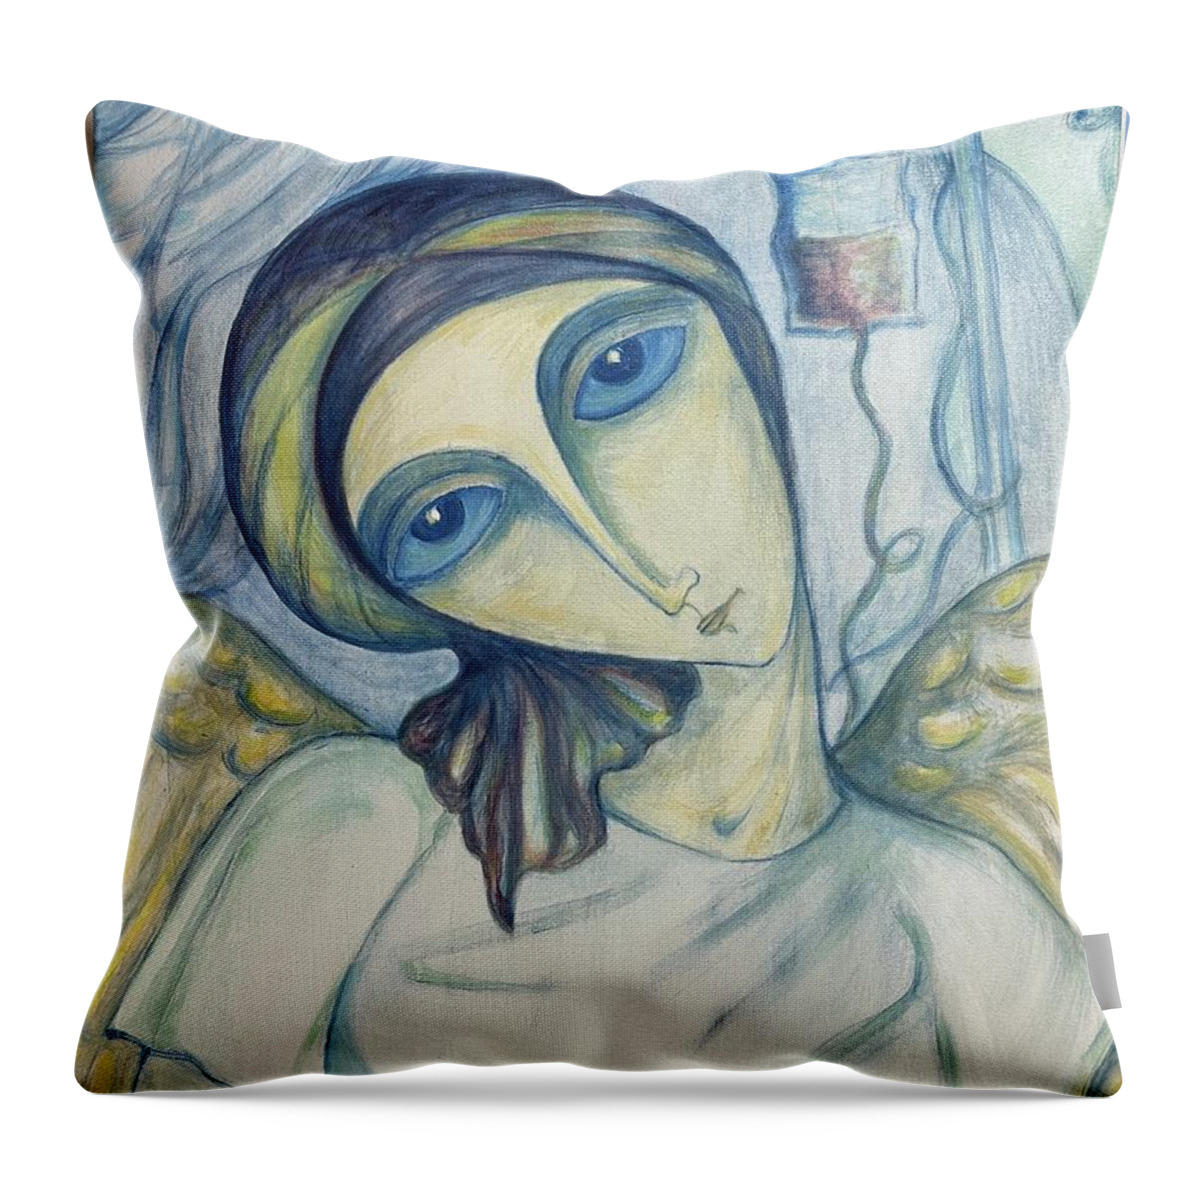 Original Throw Pillow featuring the painting Angel of Mercy by Rae Chichilnitsky